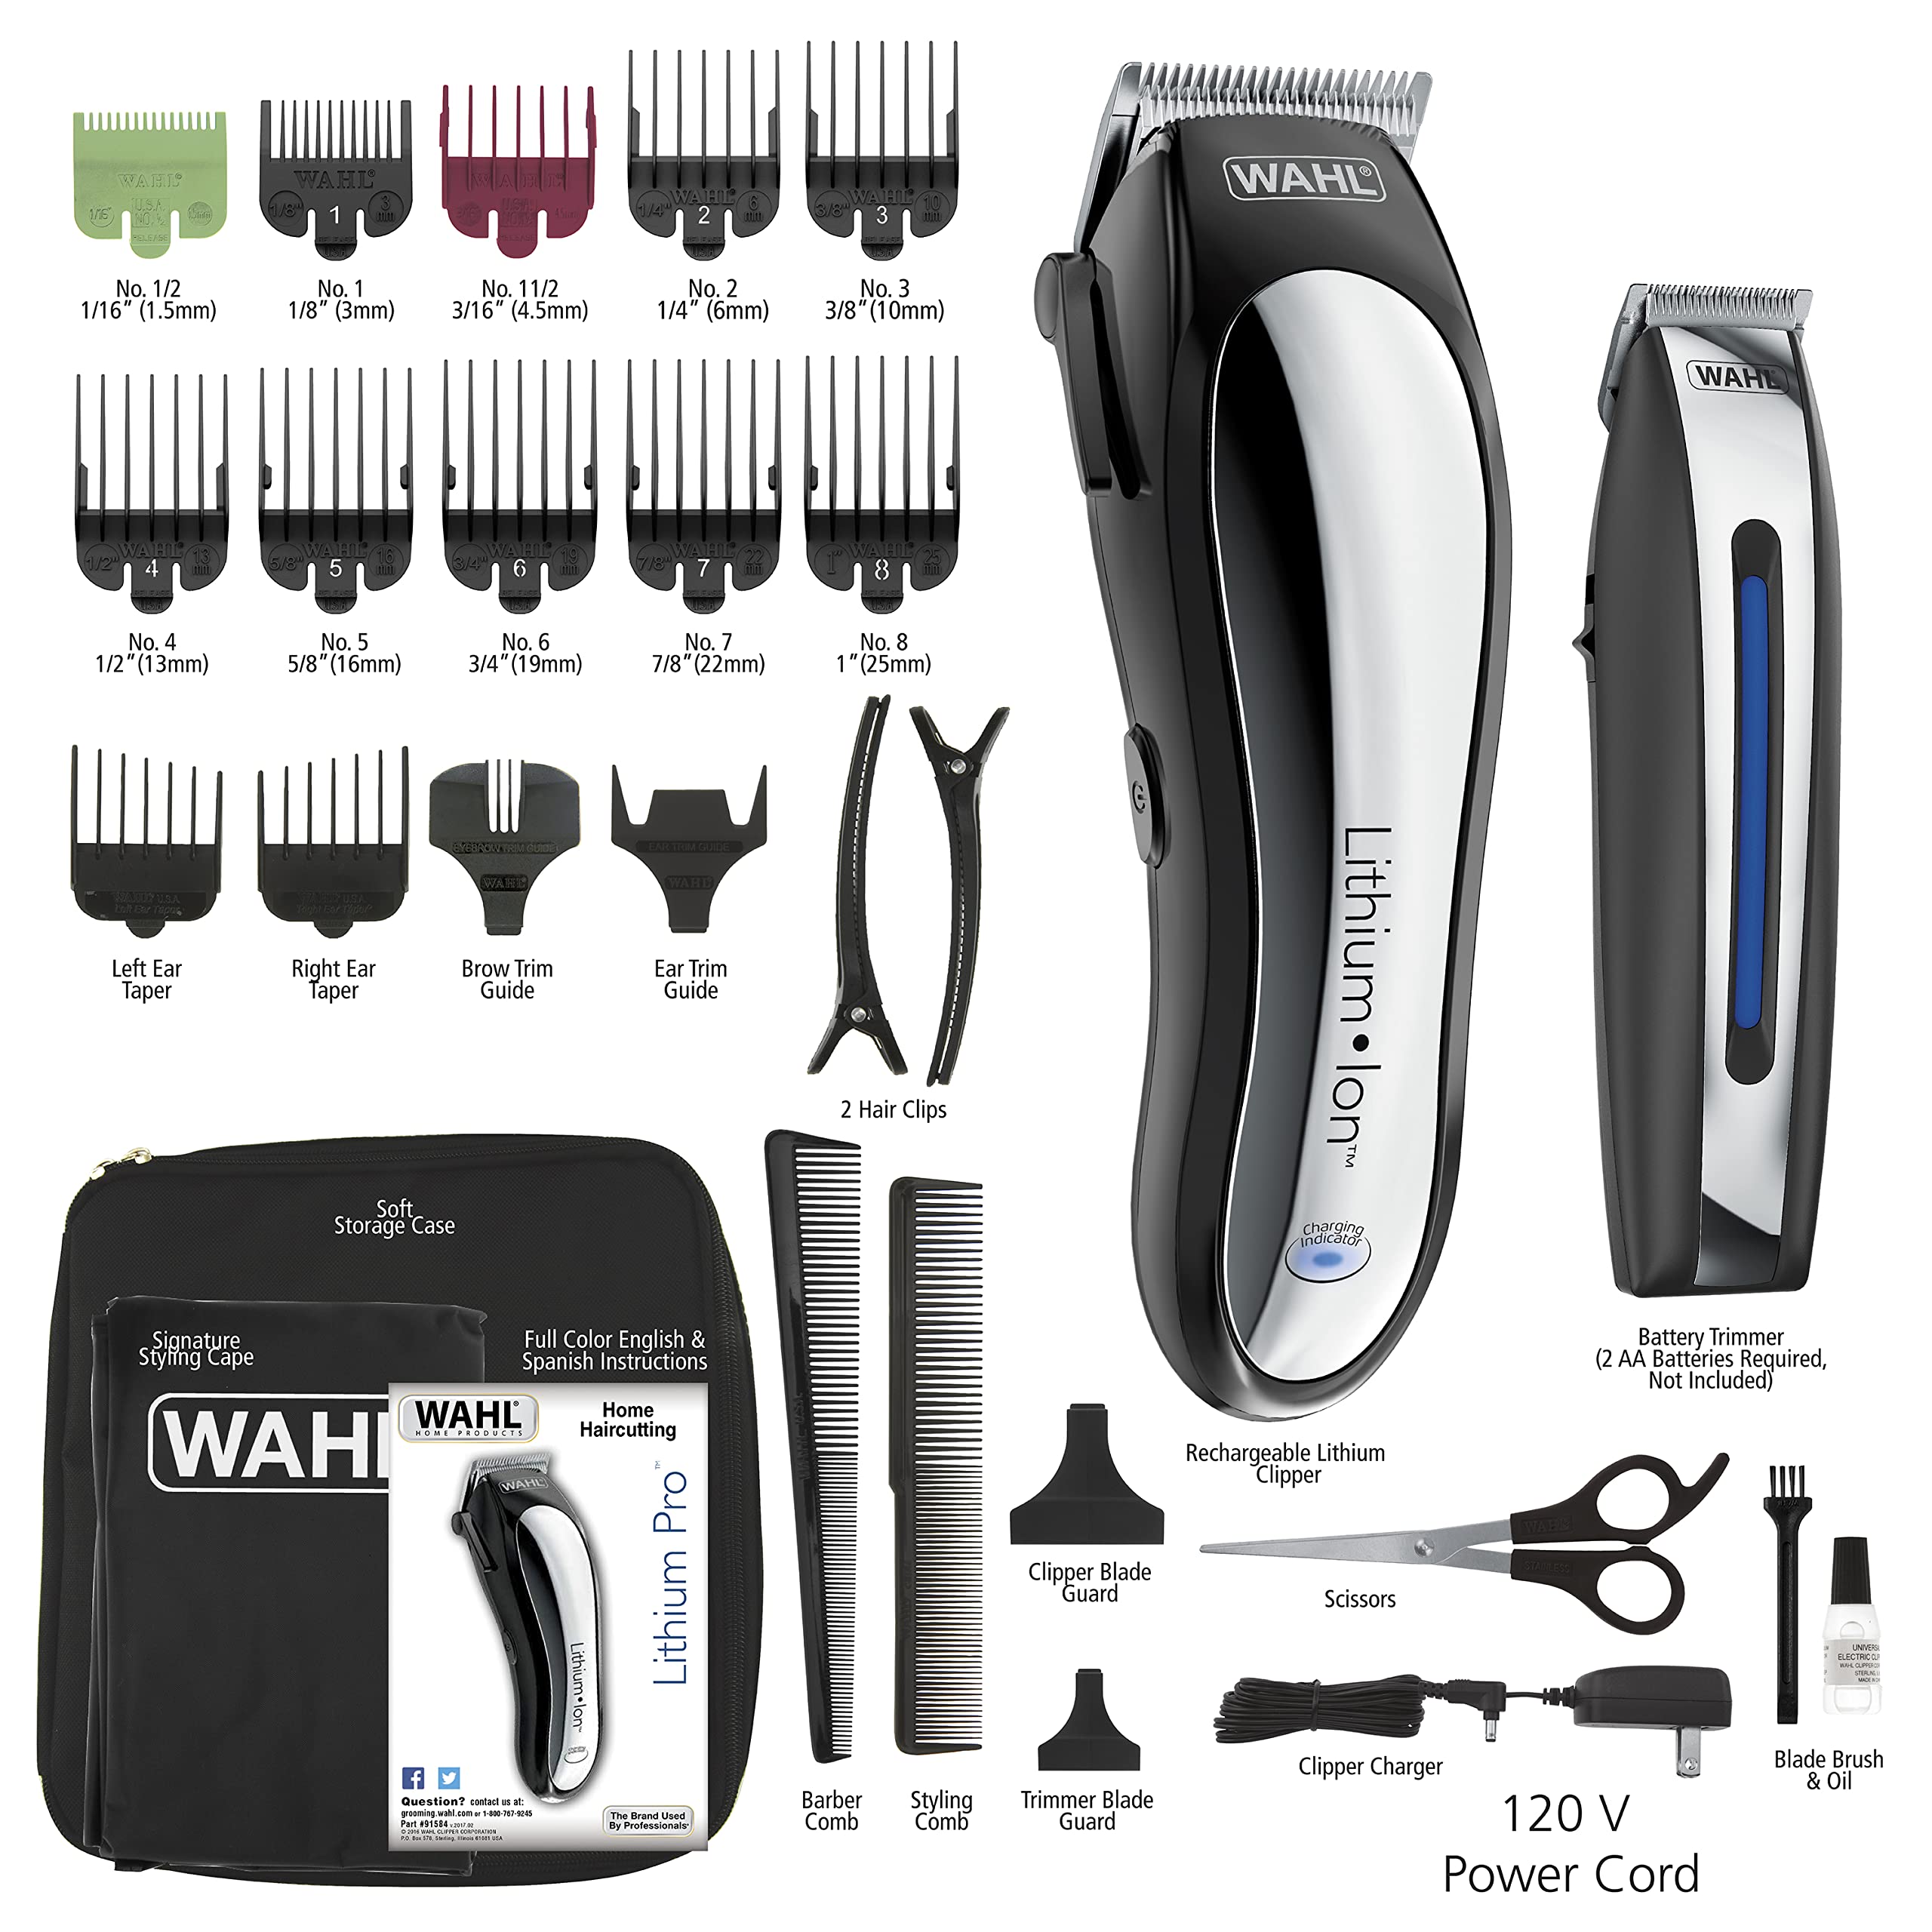 Wahl Clipper Rechargeable Lithium Ion Cordless Haircutting Clipper & Battery Trimming Combo Kit – Electric Clipper for Grooming Heads, Beards, & All Body Grooming – Model 79600-2101P